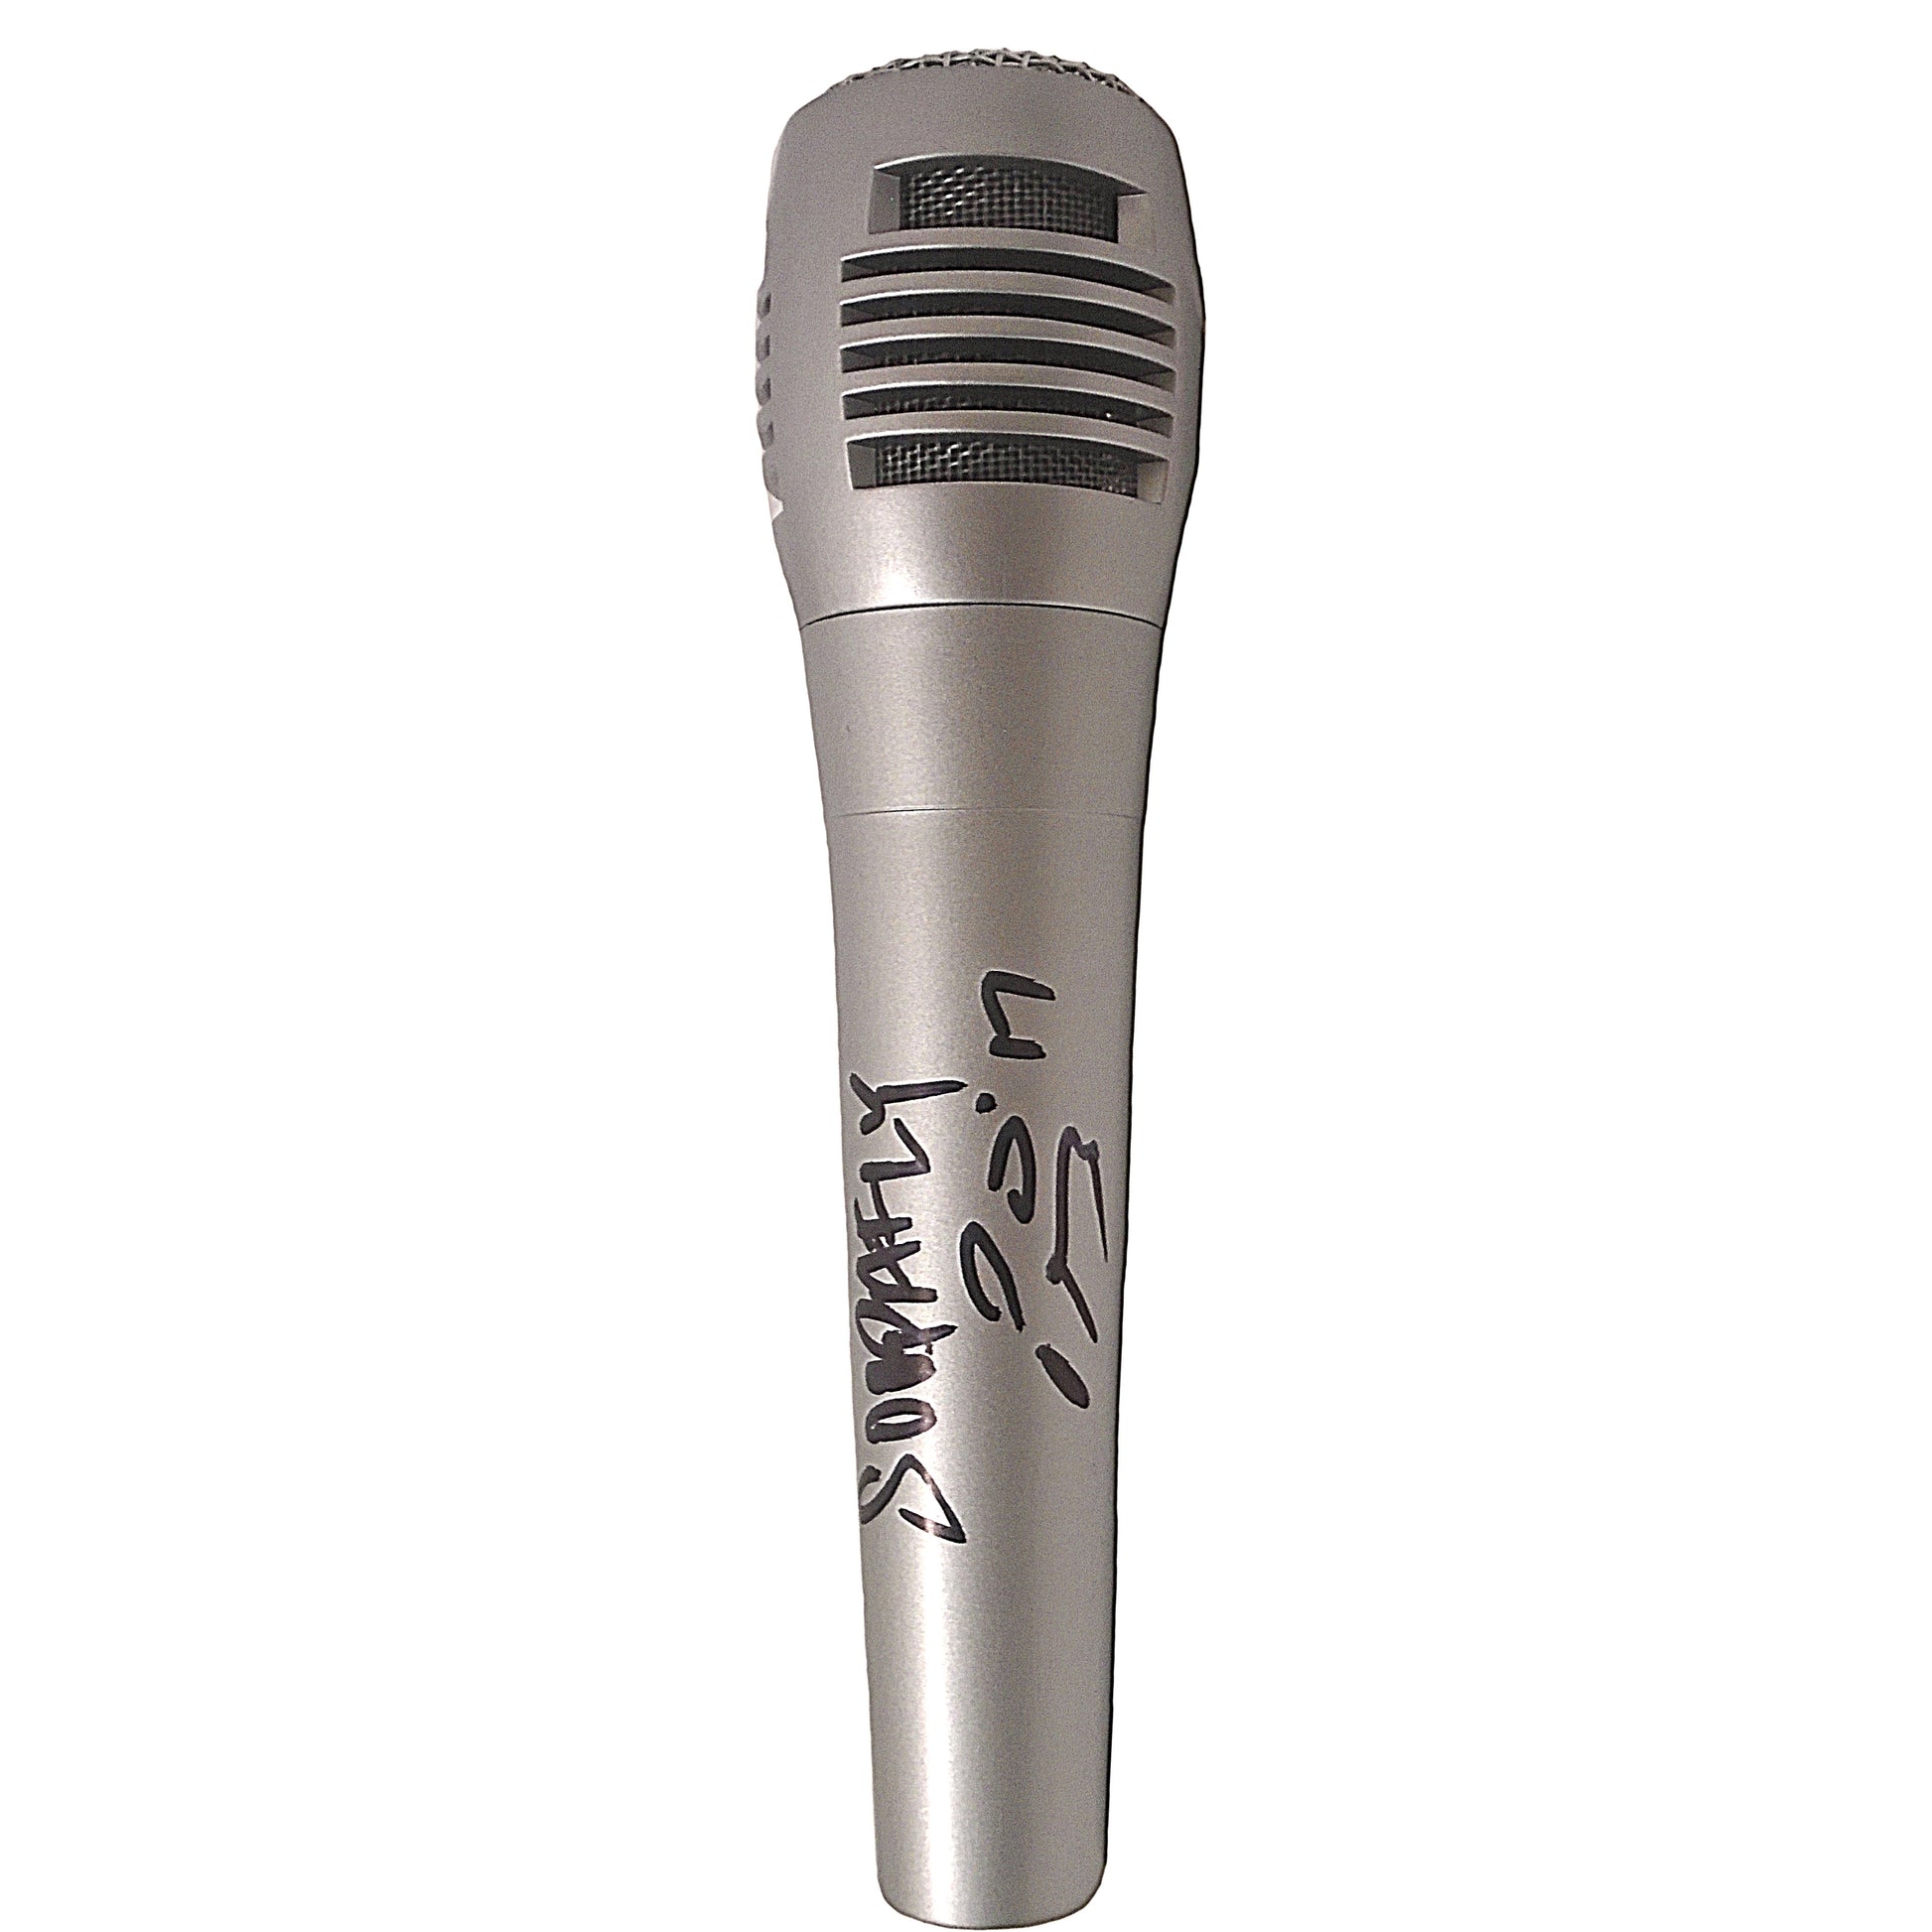 Music-Autographed - Rapper Soopafly Signed Pyle Full Size Microphone, Proof Photo - Beckett BAS 202